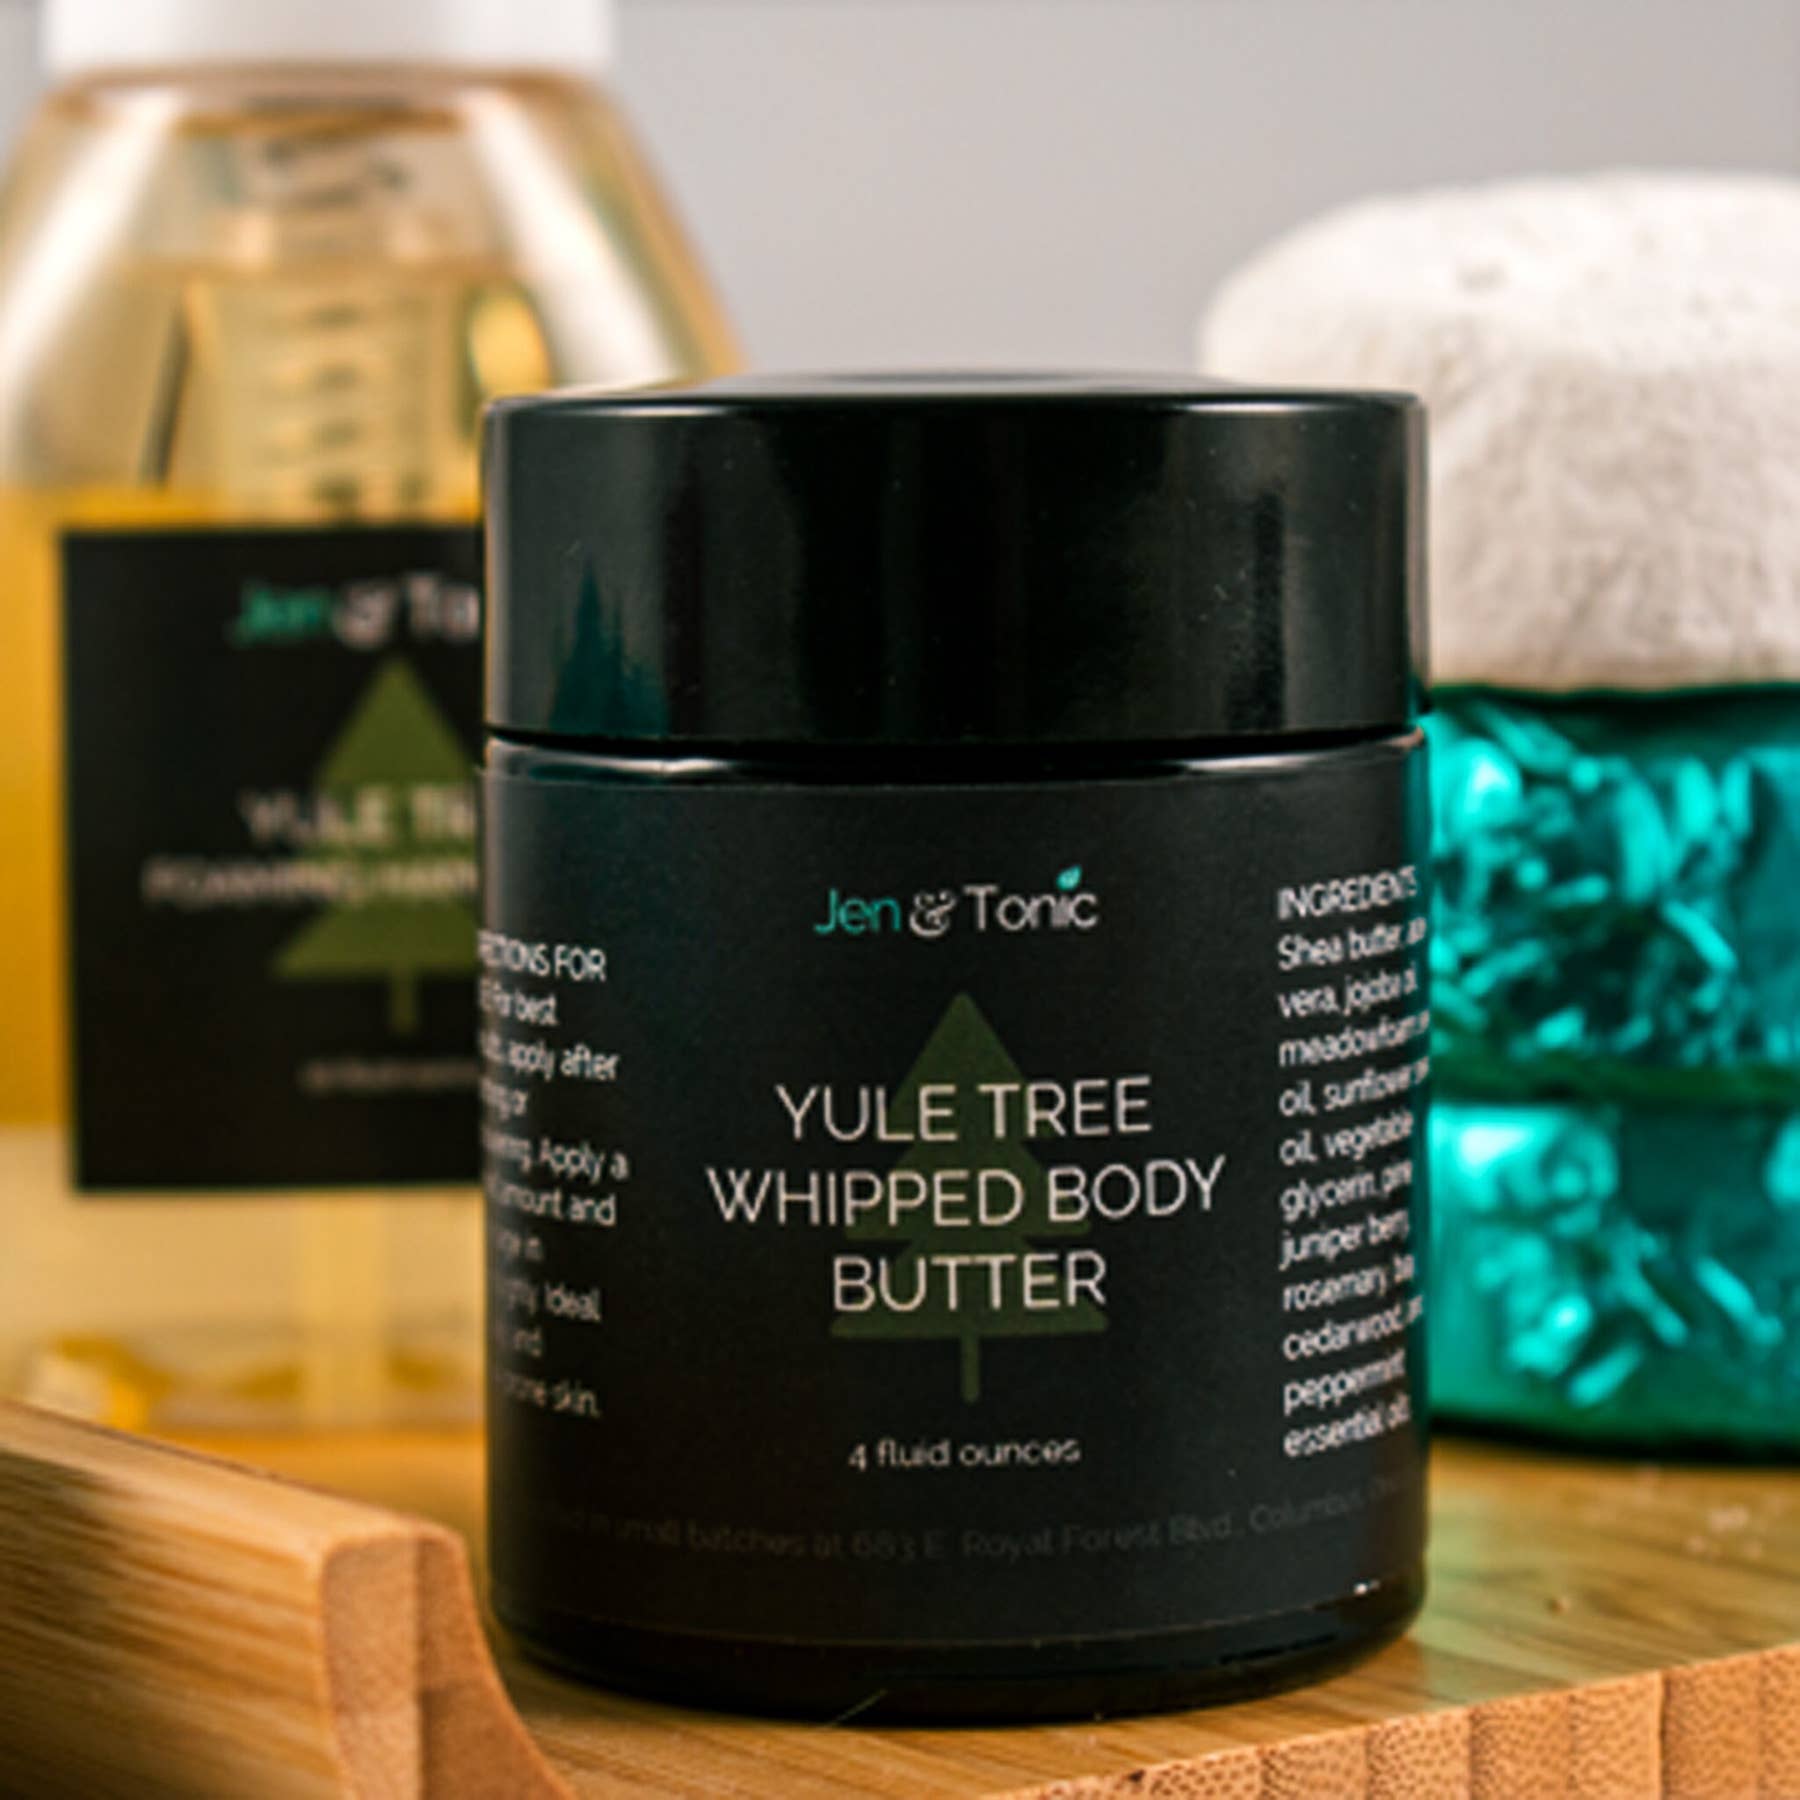 Whipped Body Butter in Yule Tree Scent